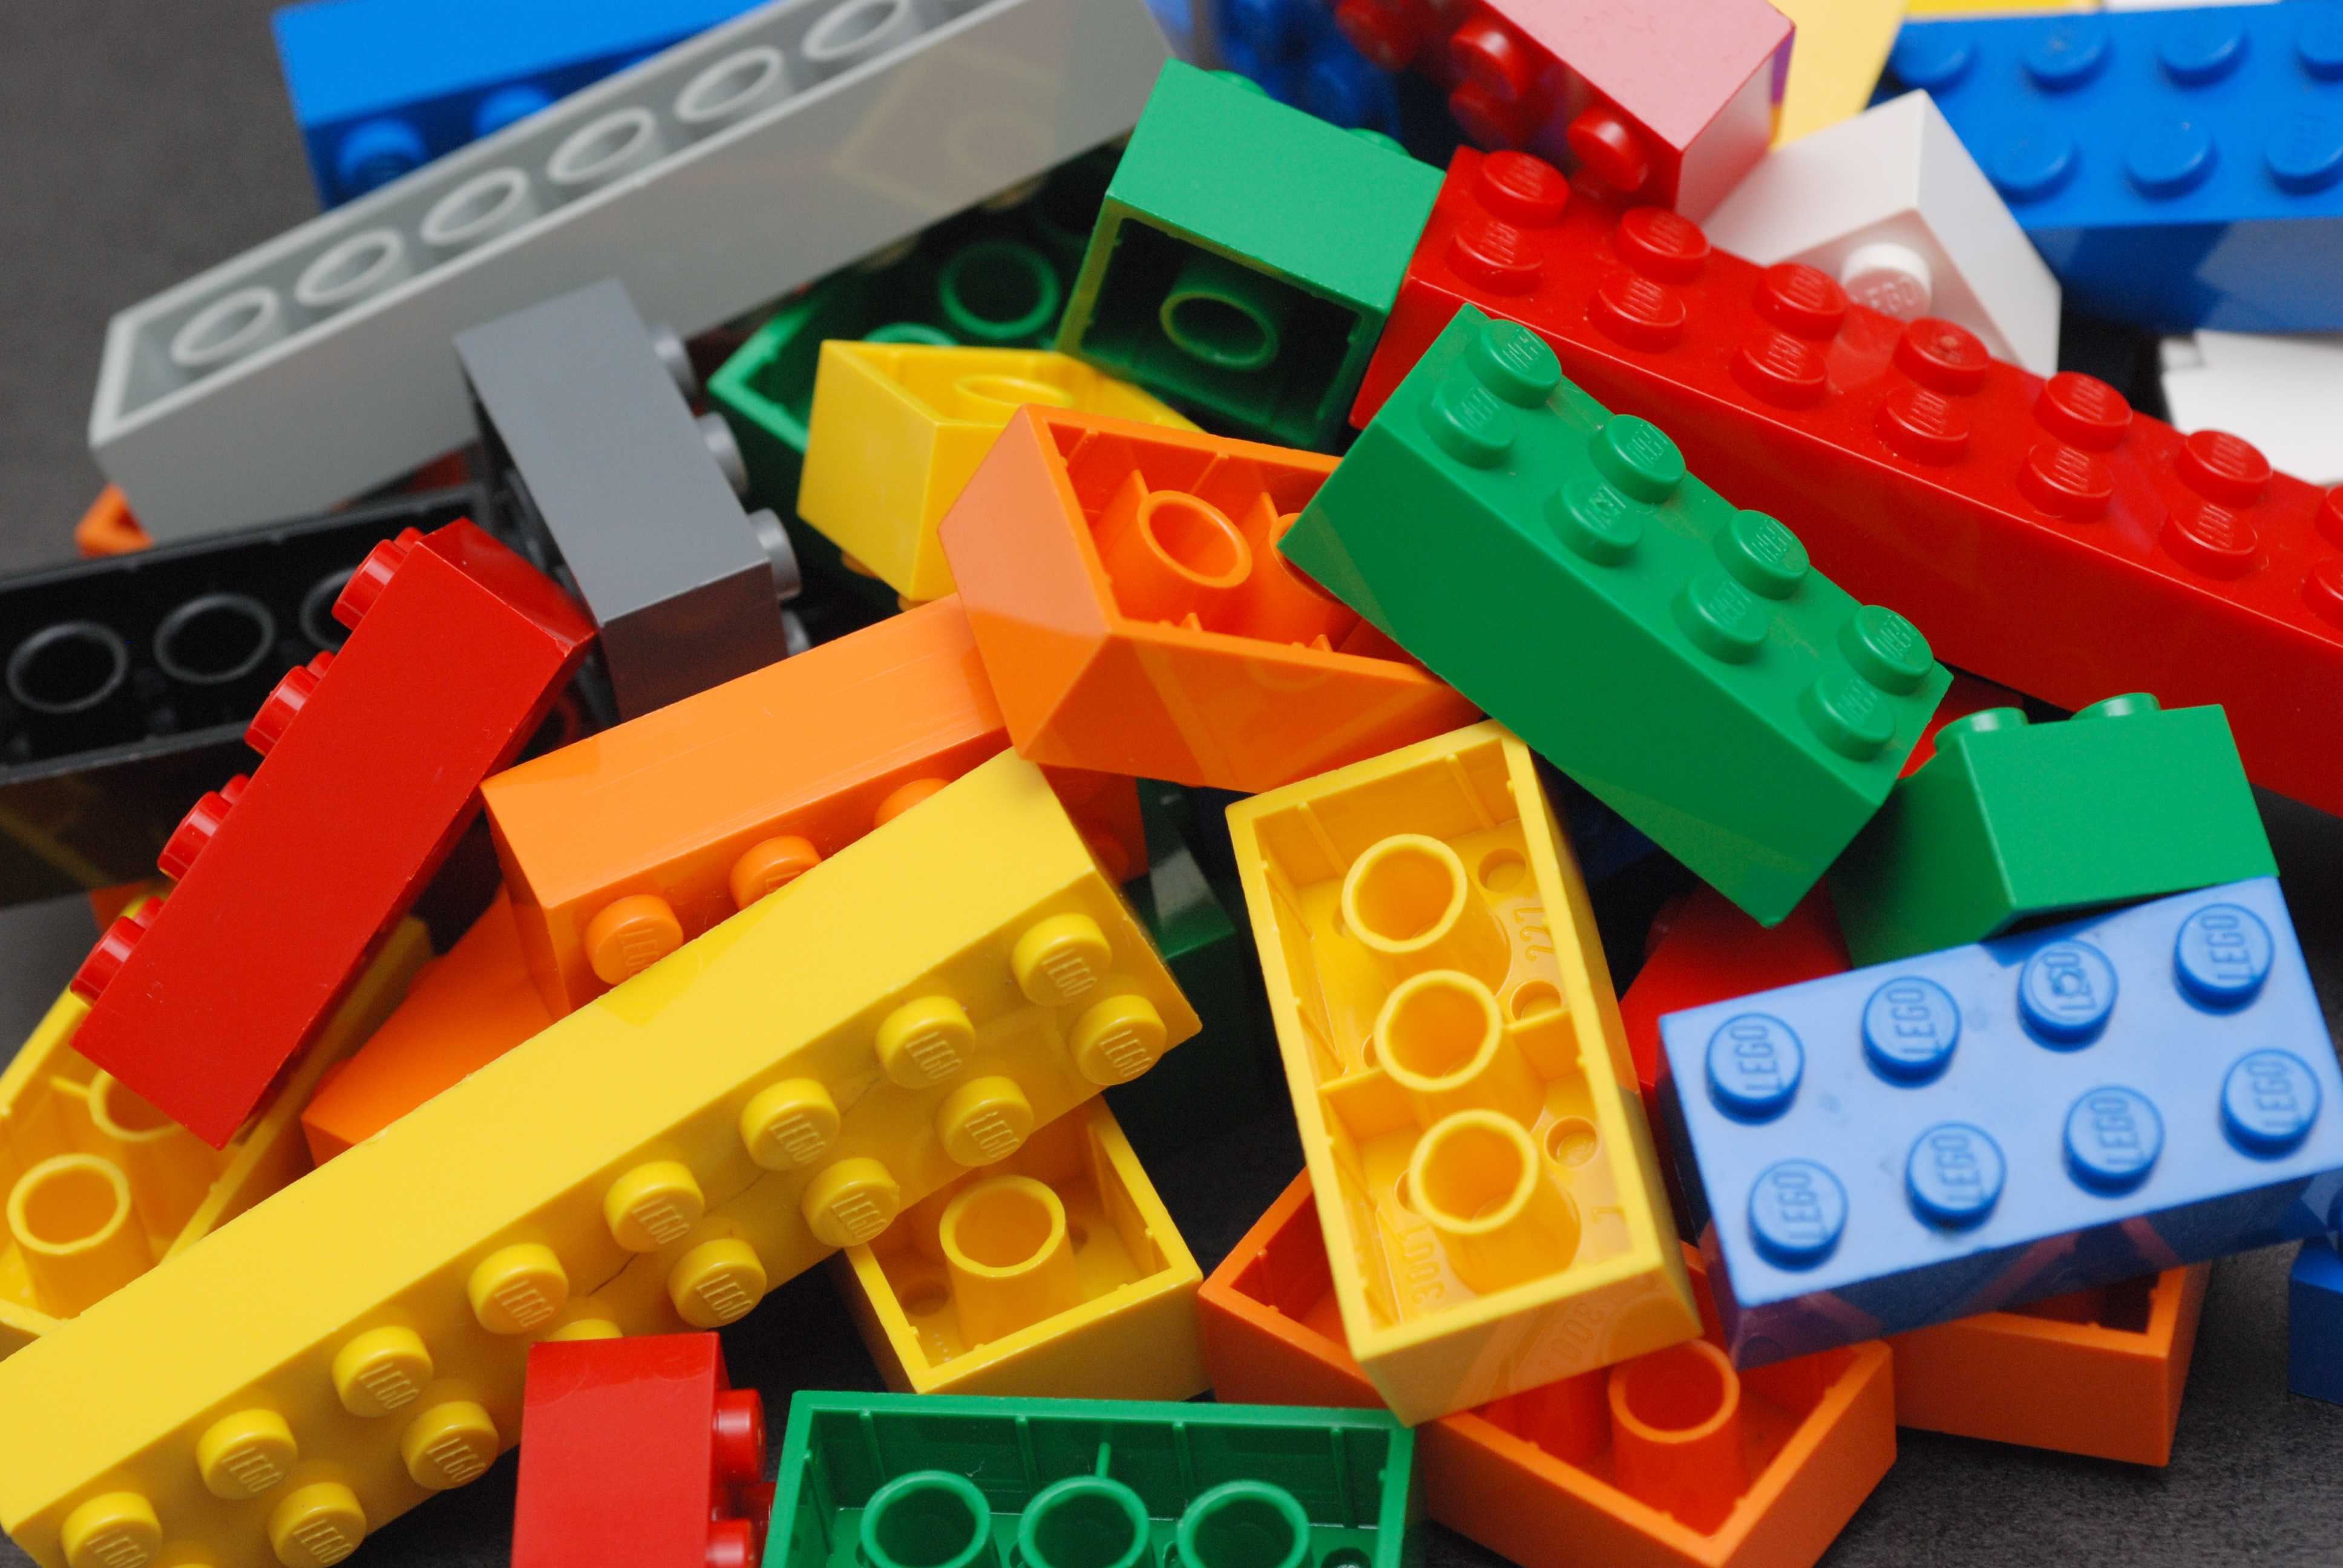 Various colors and sizes of building blocks.